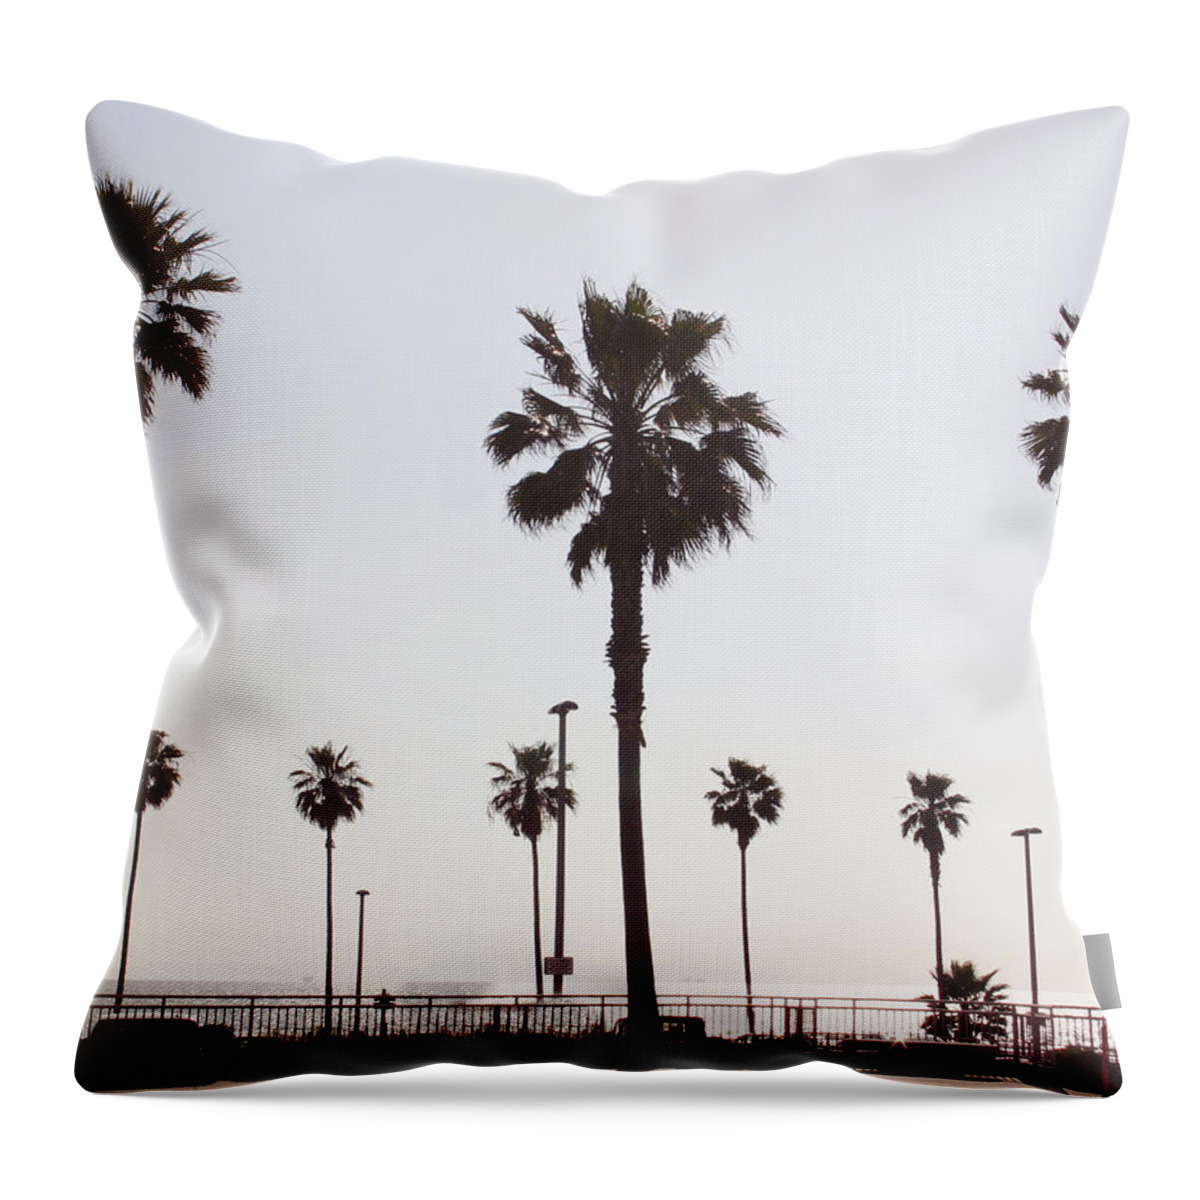 Santa Monica Throw Pillow featuring the photograph Santa Monica- Photography by Linda Woods by Linda Woods